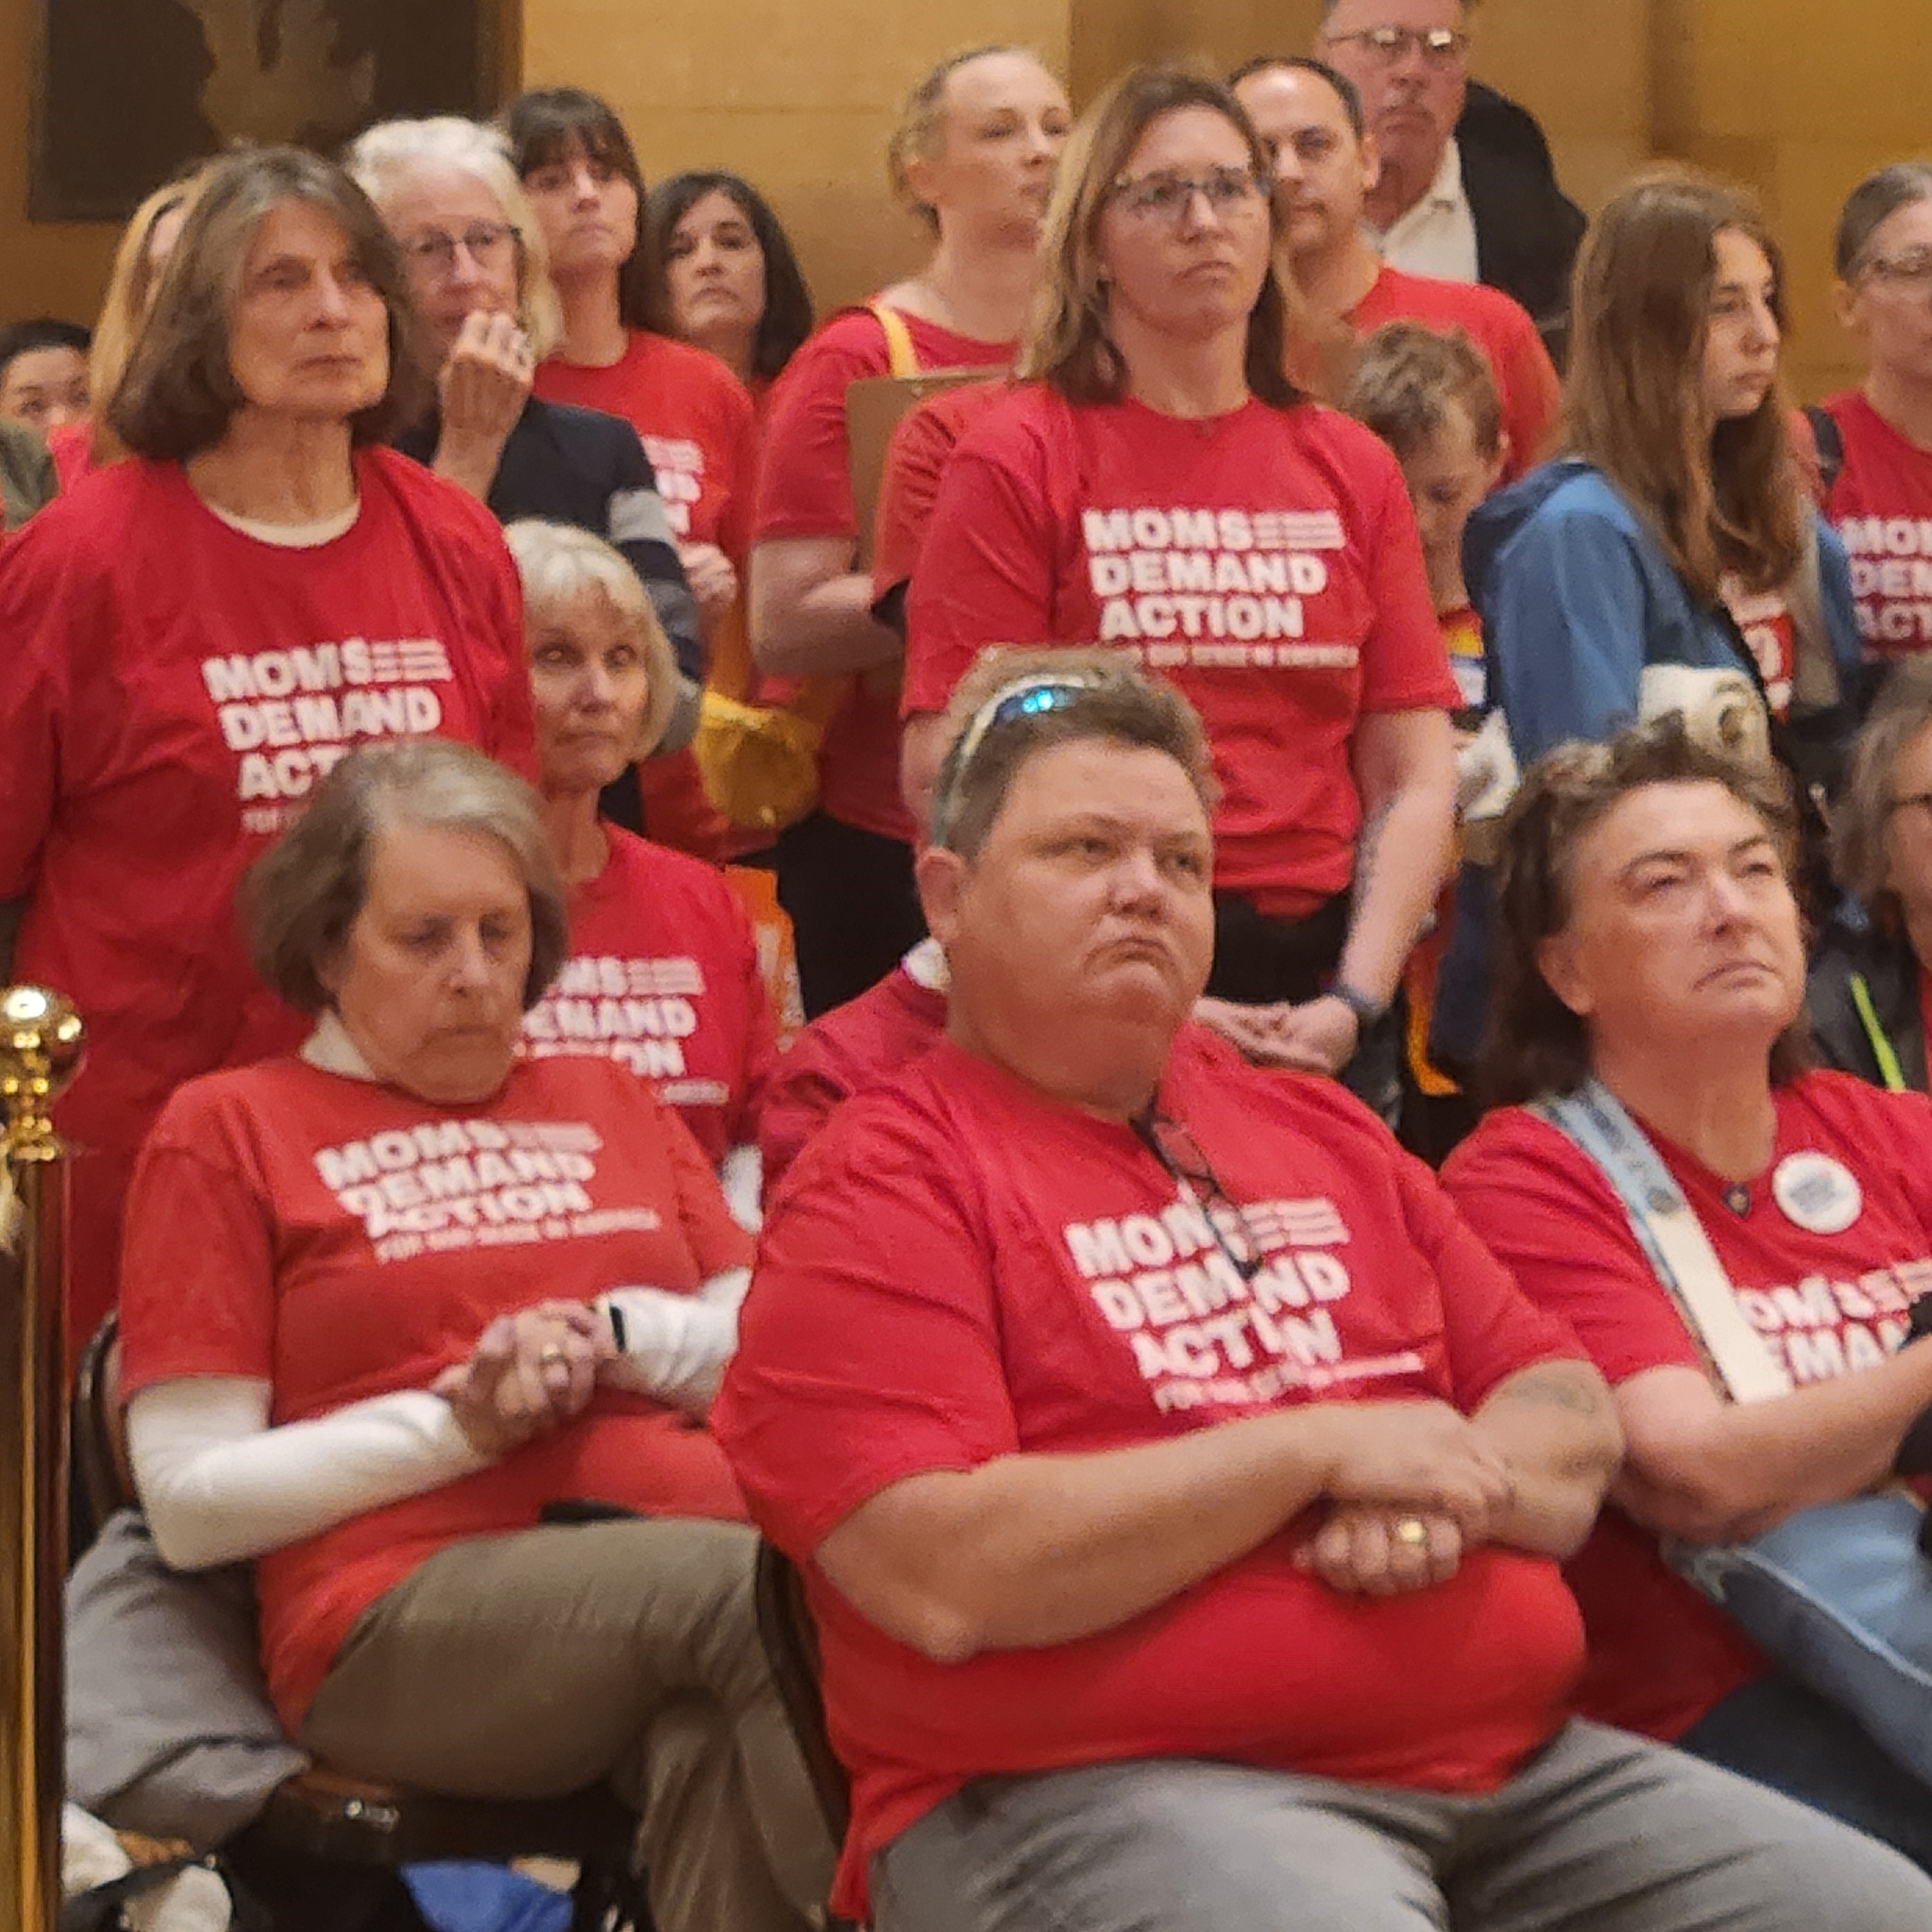 Moms Demand Action rally for better gun safety measures at the State Capitol in St. Paul